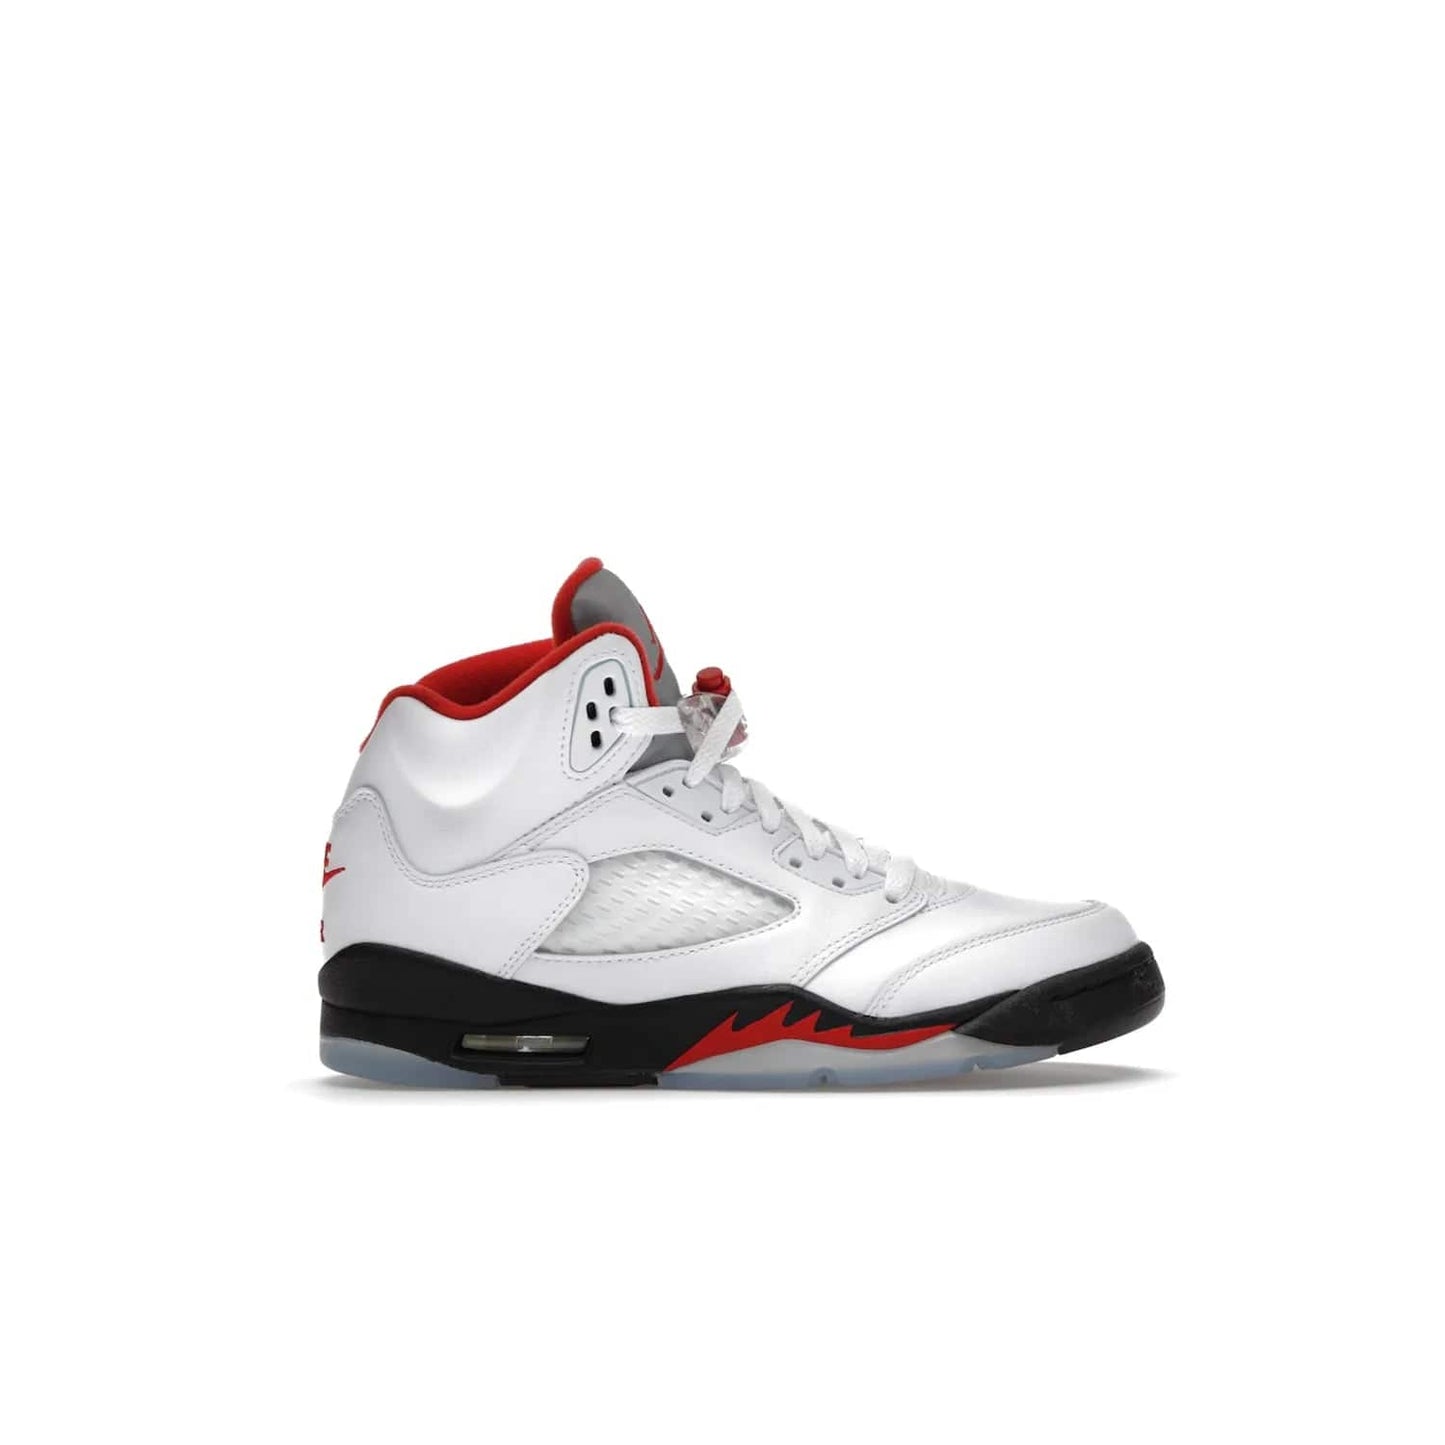 Jordan 5 Retro Fire Red Silver Tongue (2020) (GS) - Image 1 - Only at www.BallersClubKickz.com - A stylish option for any grade schooler. The Air Jordan 5 Retro Fire Red Silver Tongue 2020 GS features a combination of four hues, premium white leather, a clear mesh mid-upper and a reflective silver tongue. An icy translucent blue outsole completes the look. Available on May 2, $150.